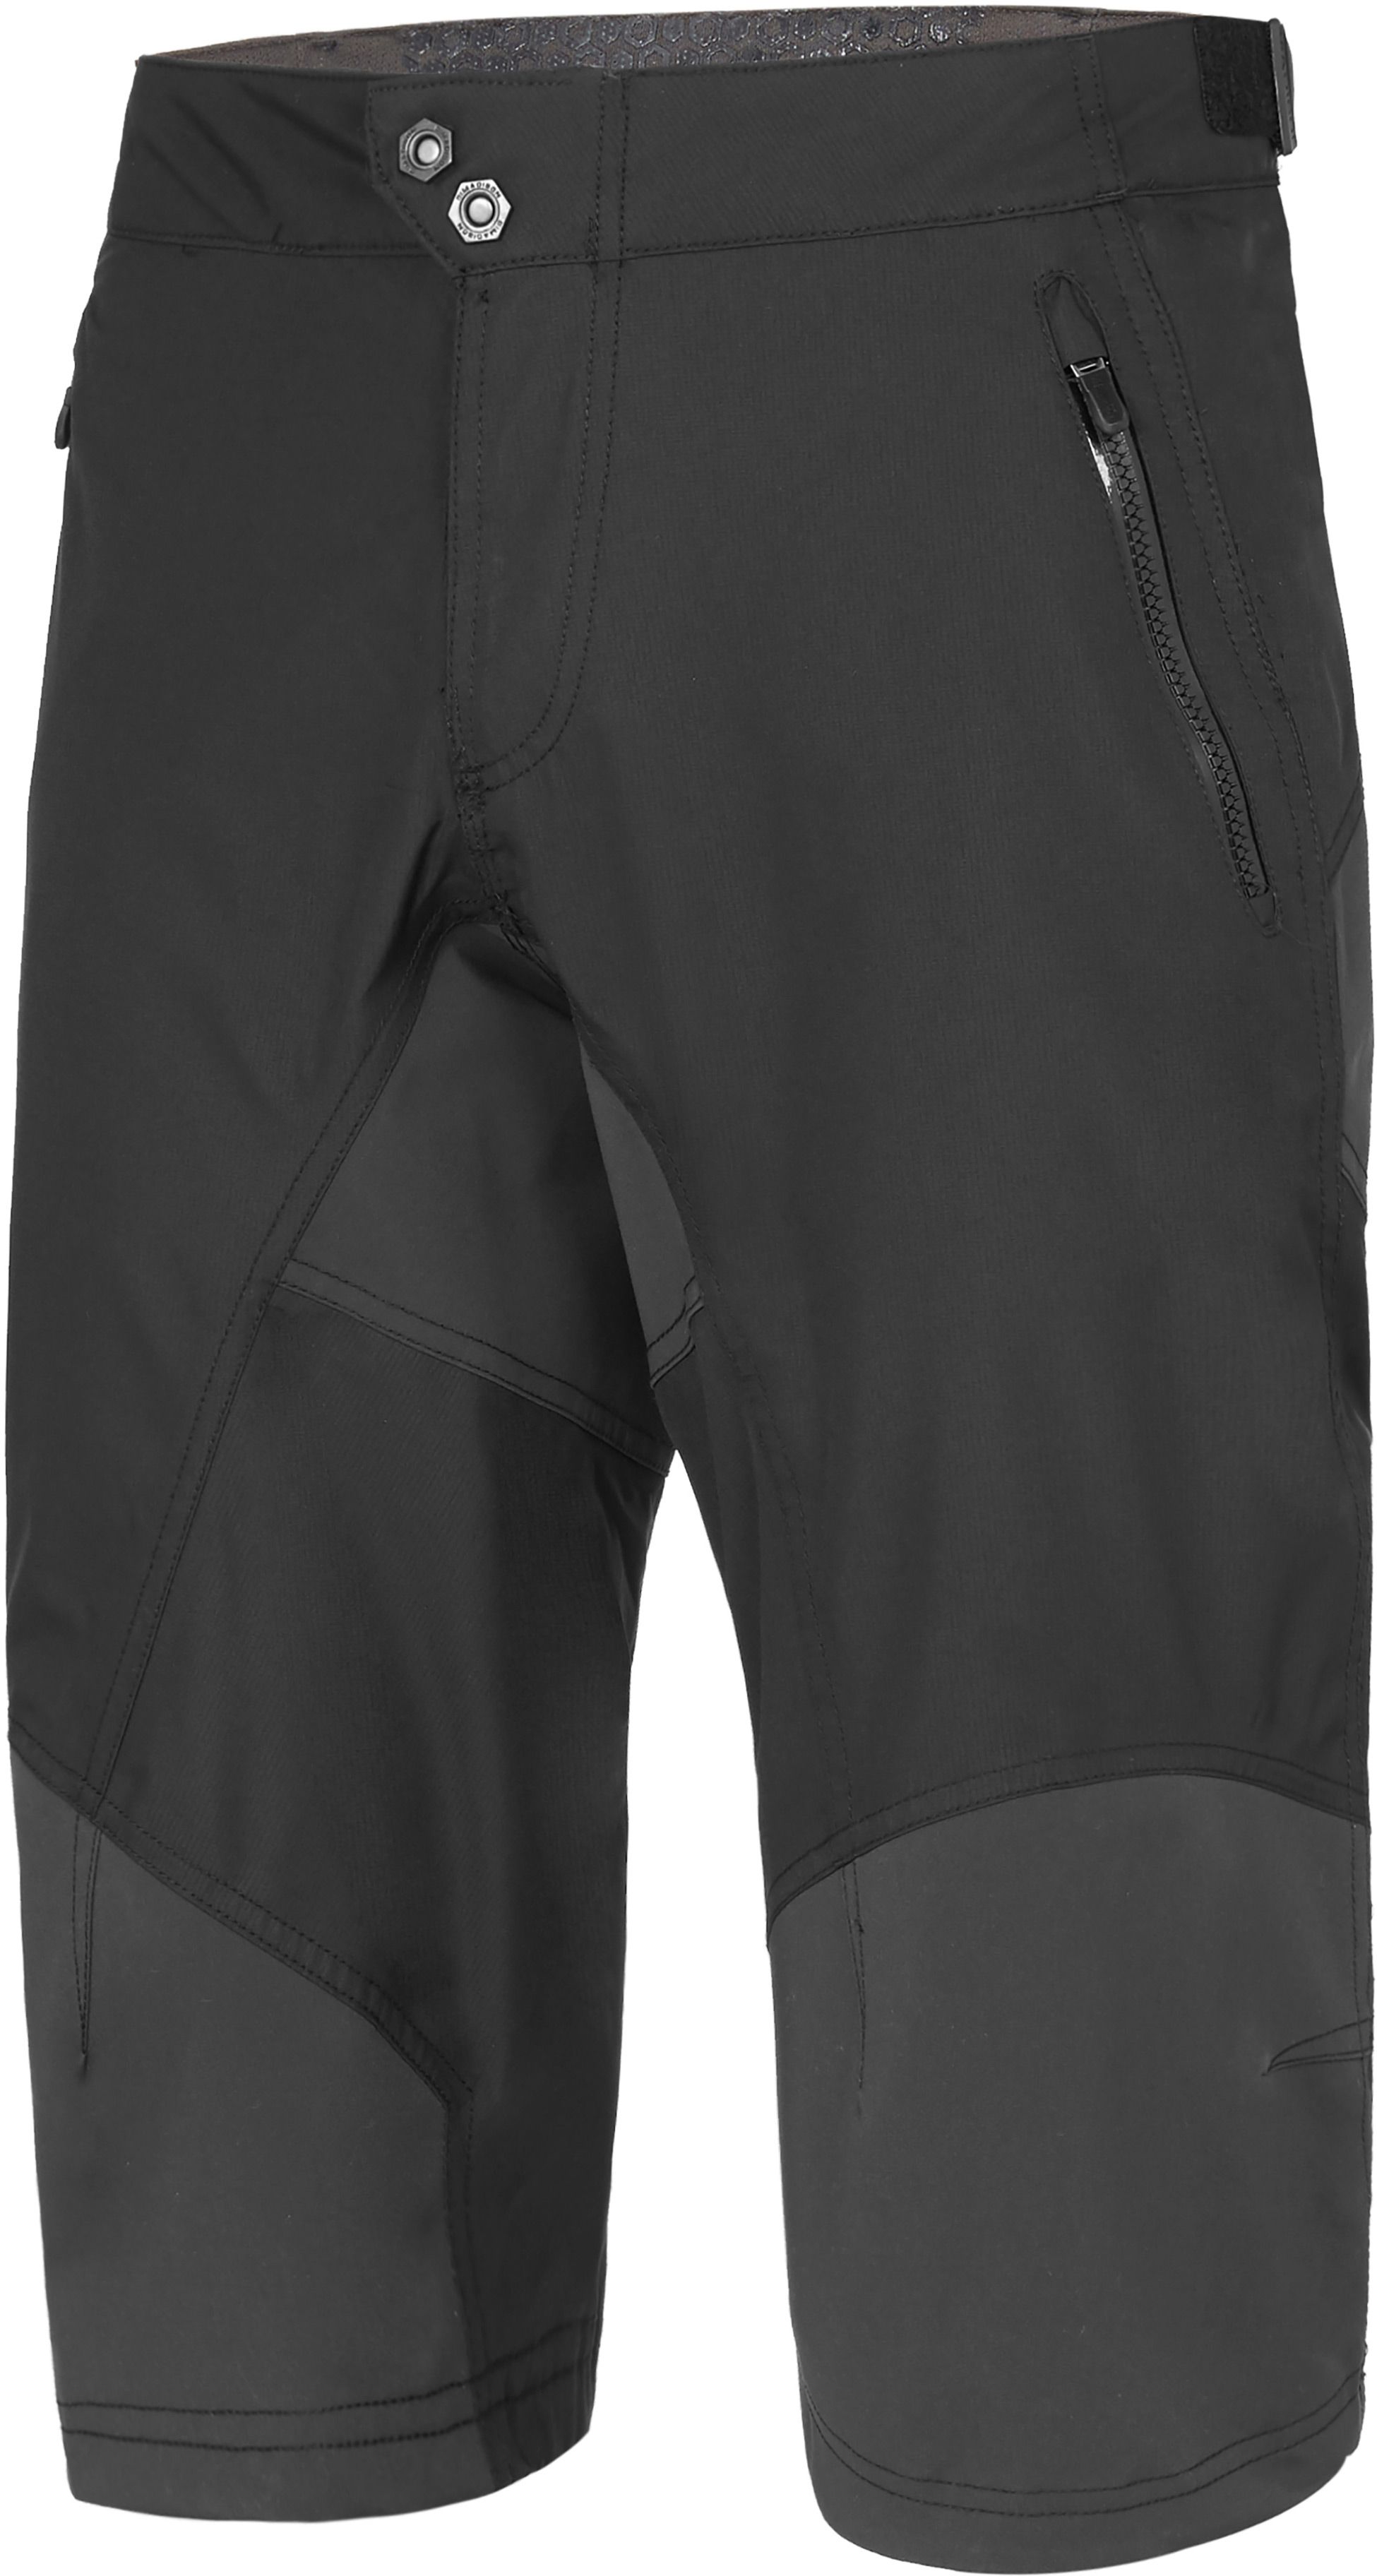 Madison Dte Waterproof Shorts Black - £69.99 | Shorts - Baggy Loose Fit ...